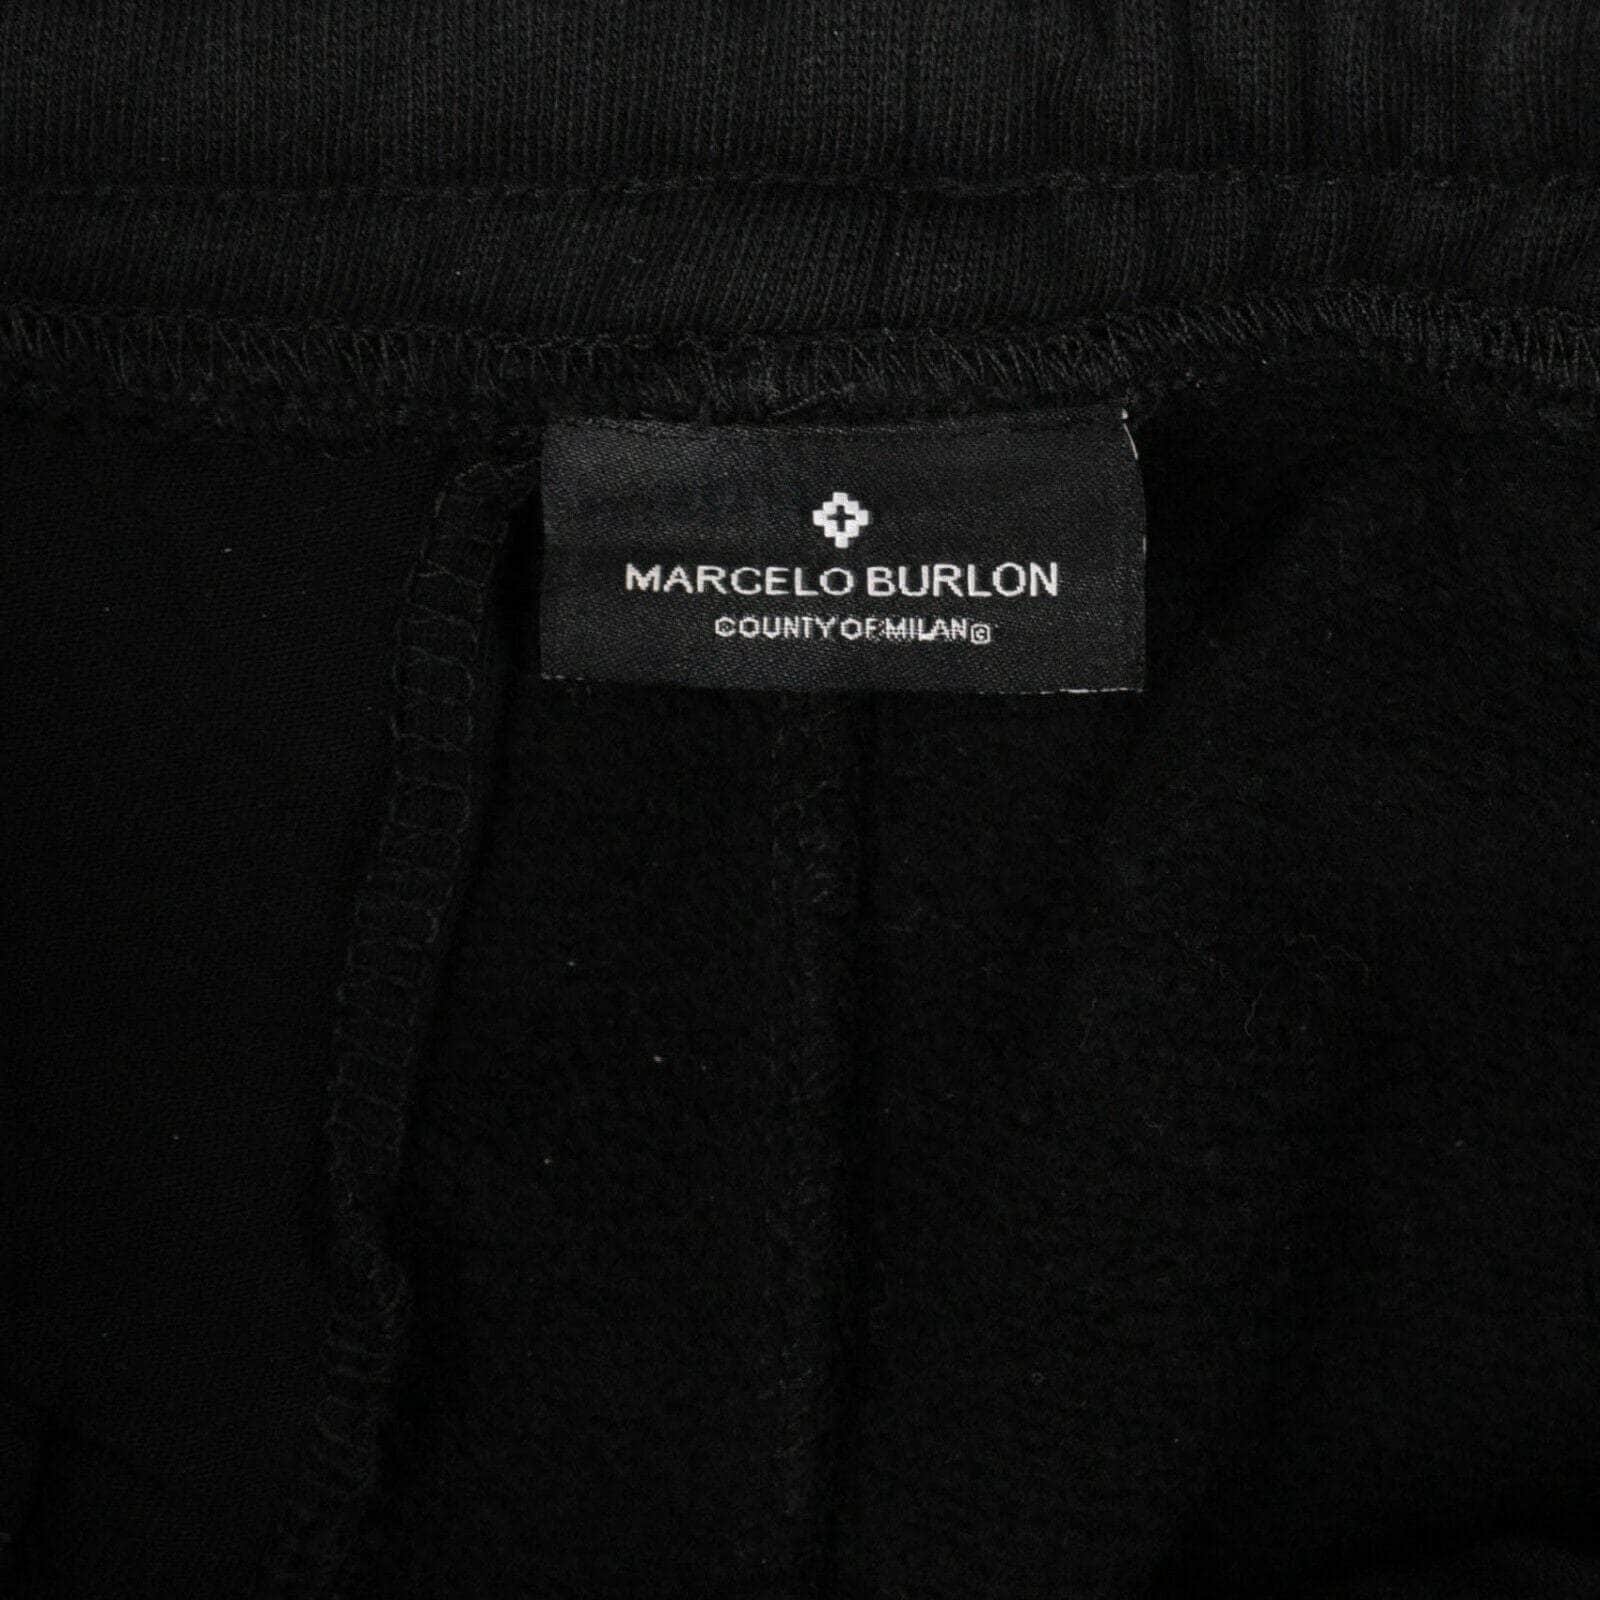 MARCELO BURLON couponcollection, gender-mens, main-clothing, marcelo-burlon, mens-track-pants, size-m, size-xs, under-250 XS Black Hot Dog Track Pants 82NGG-MB-1158/XS 82NGG-MB-1158/XS